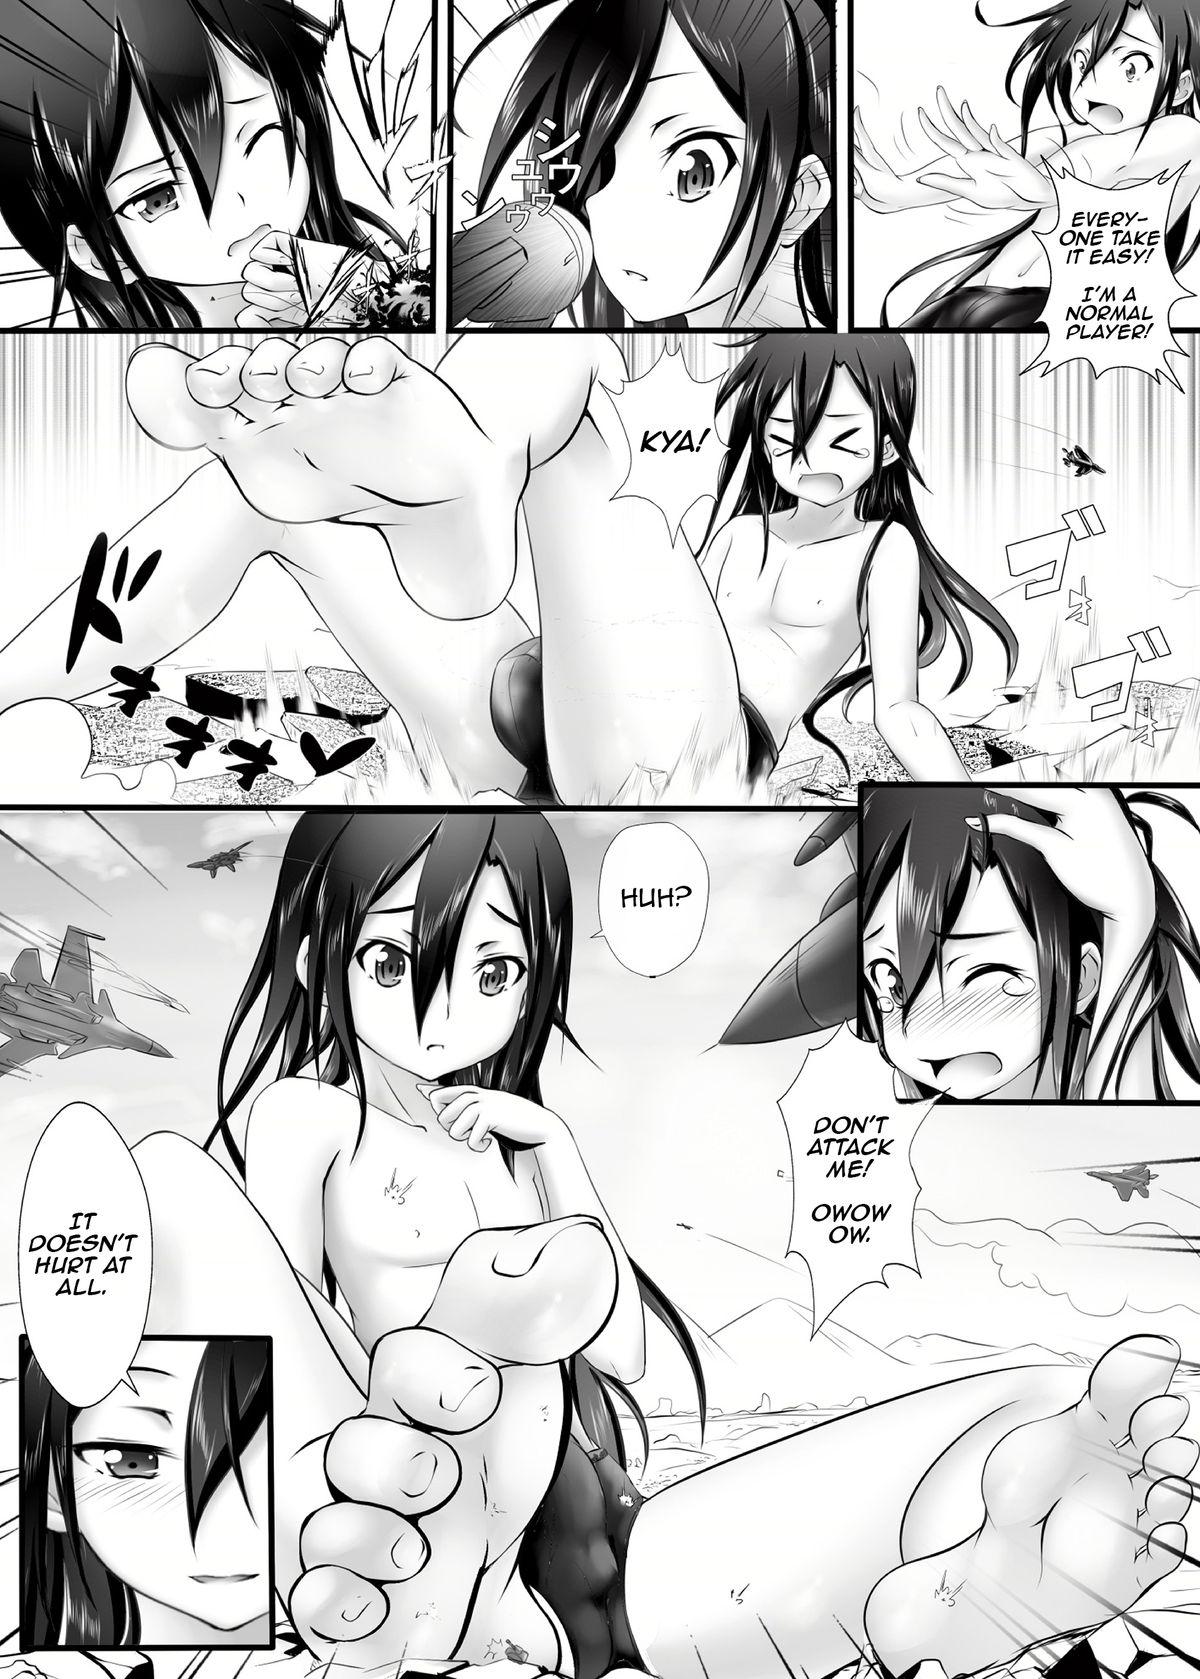 Free Blowjob BUG ART ONLINE 1.5 Game Time - Sword art online College - Page 6